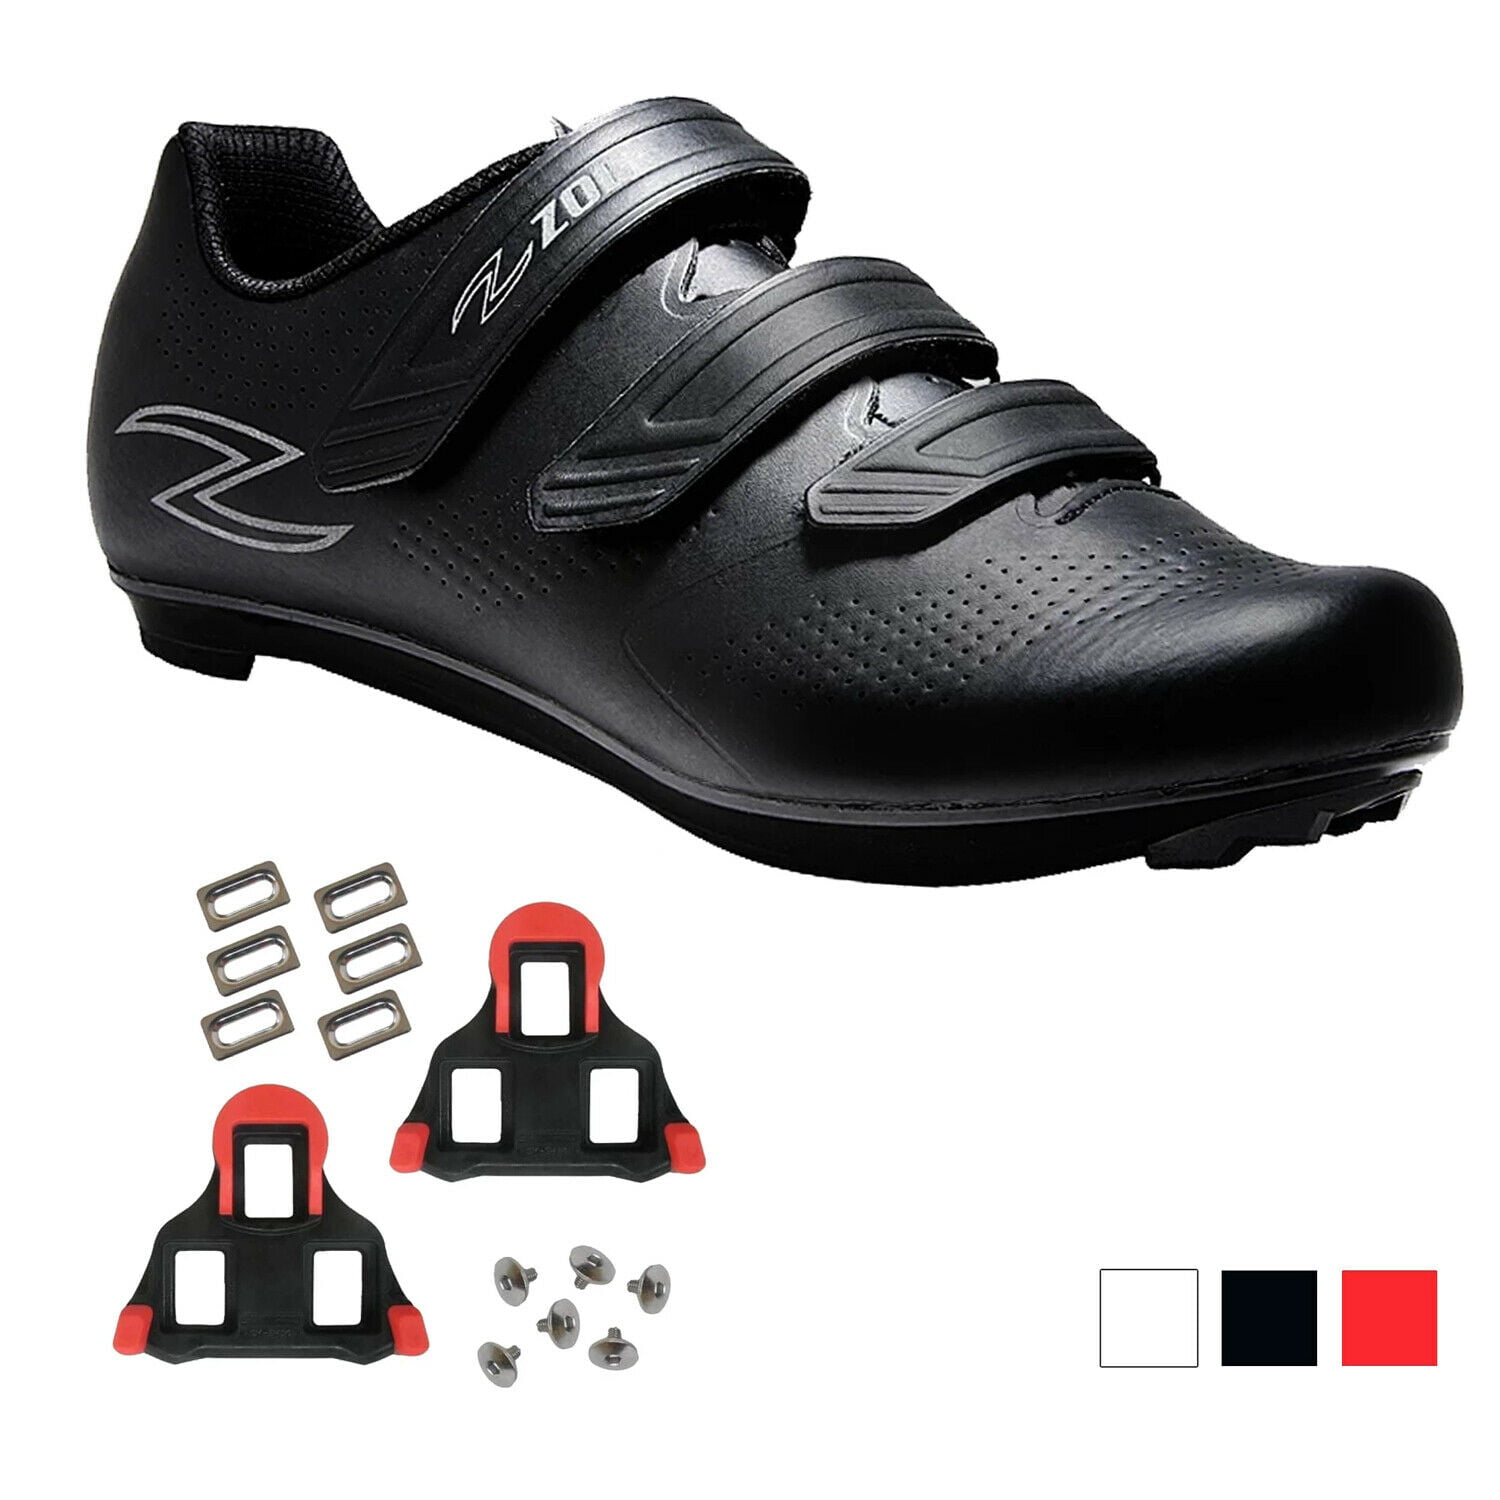 Zol Fondo Road Cycling Shoes with SPD 